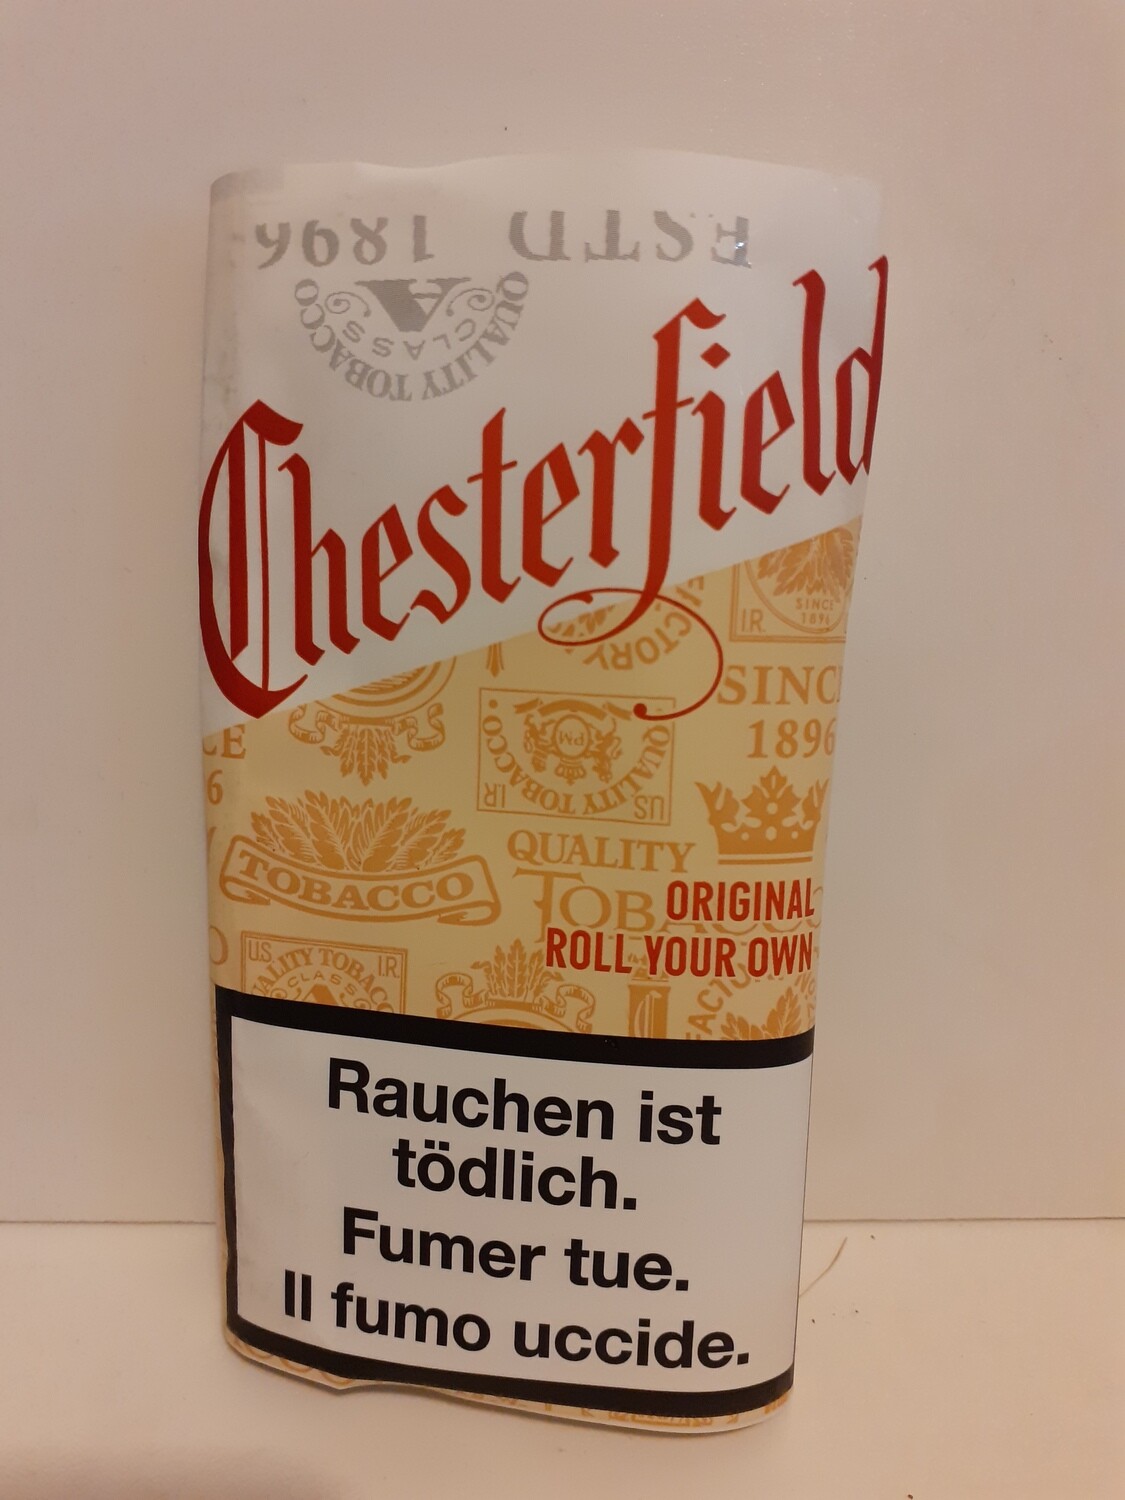 Chesterfield Tabac  30 g